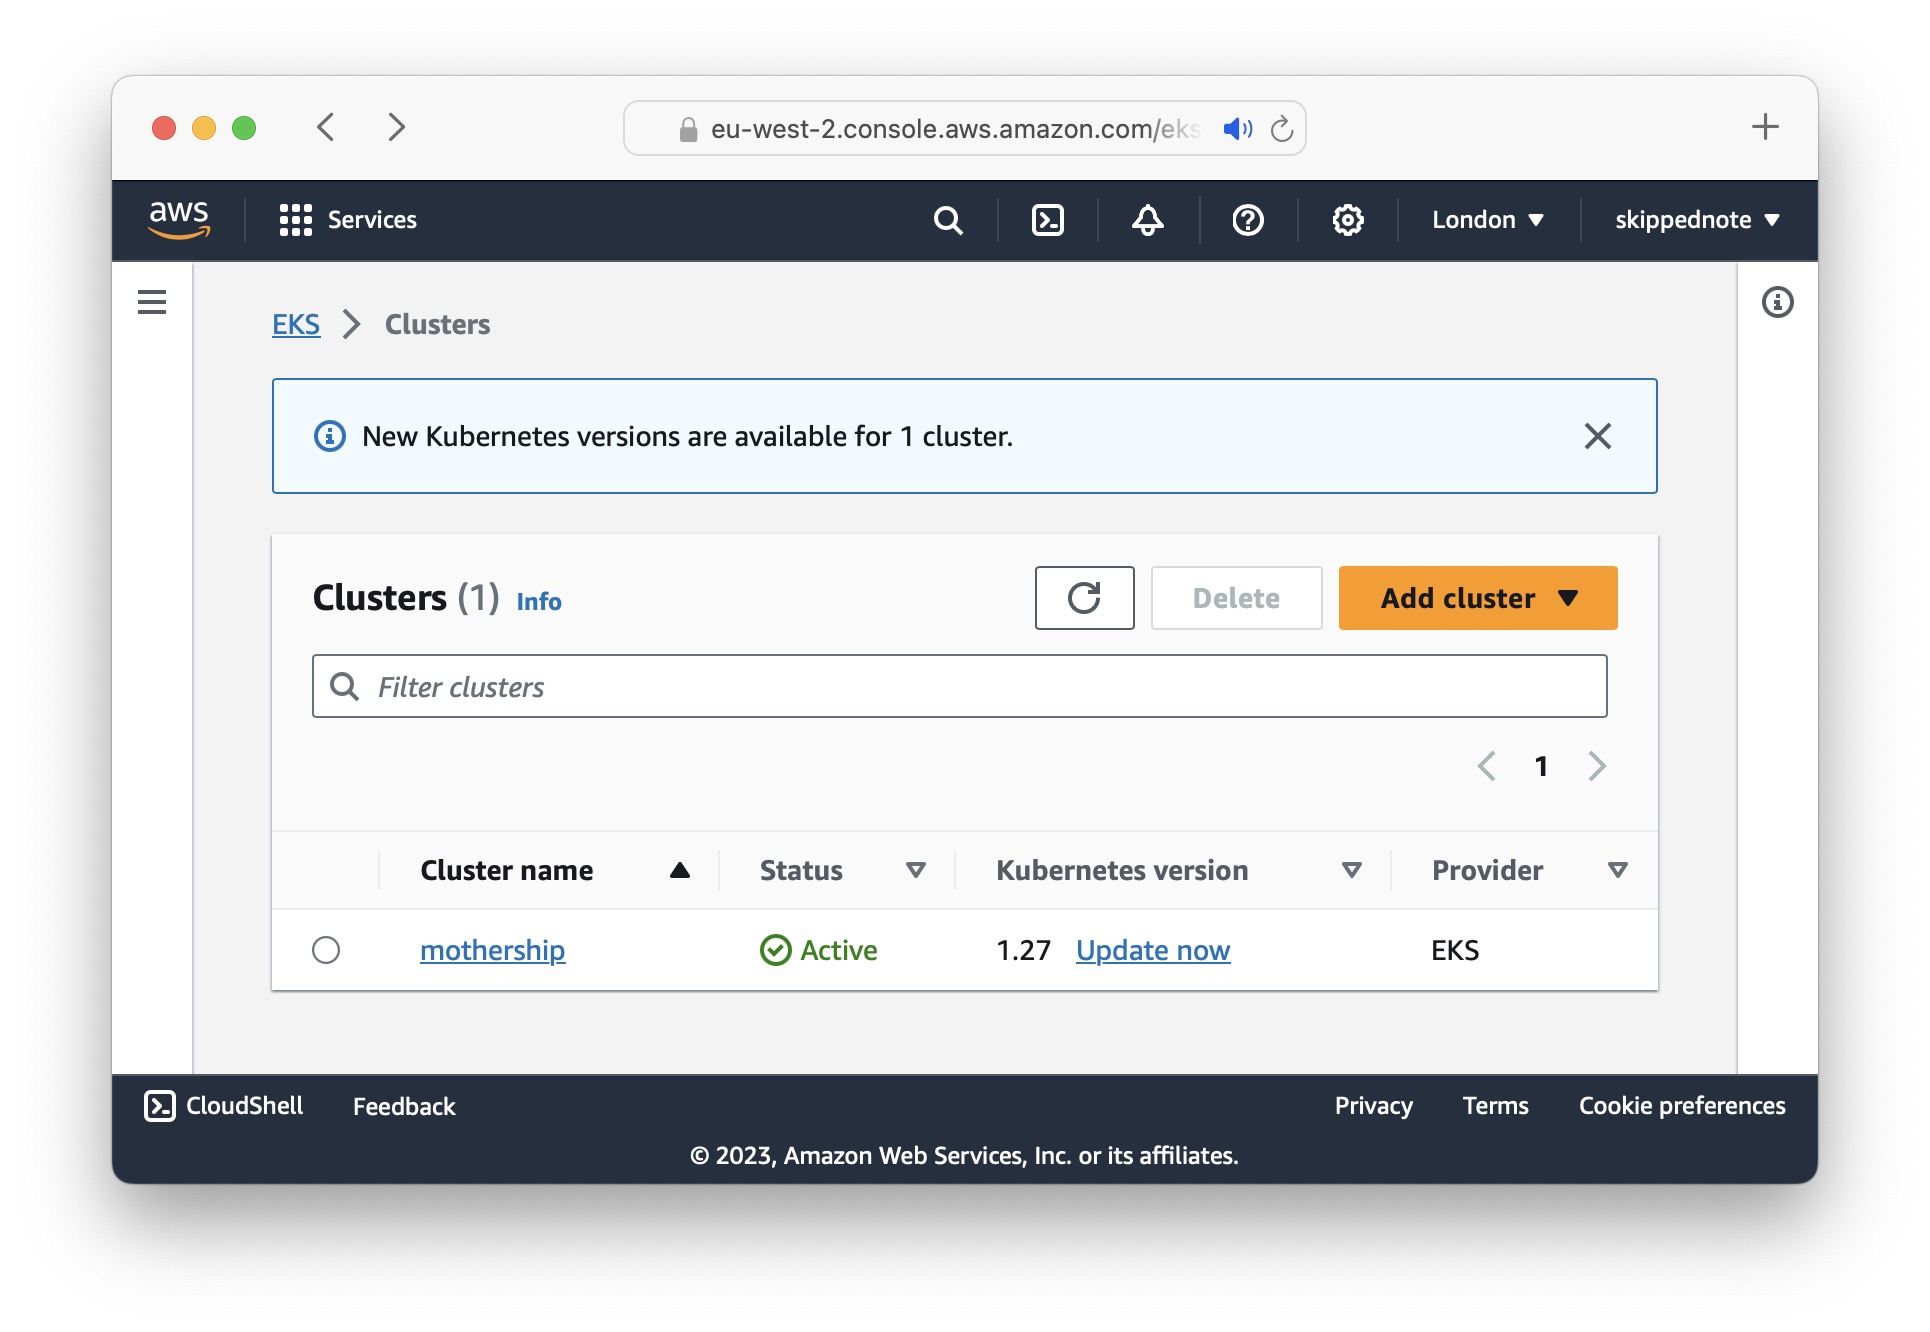 Screenshot of AWS Console with EKS service page open